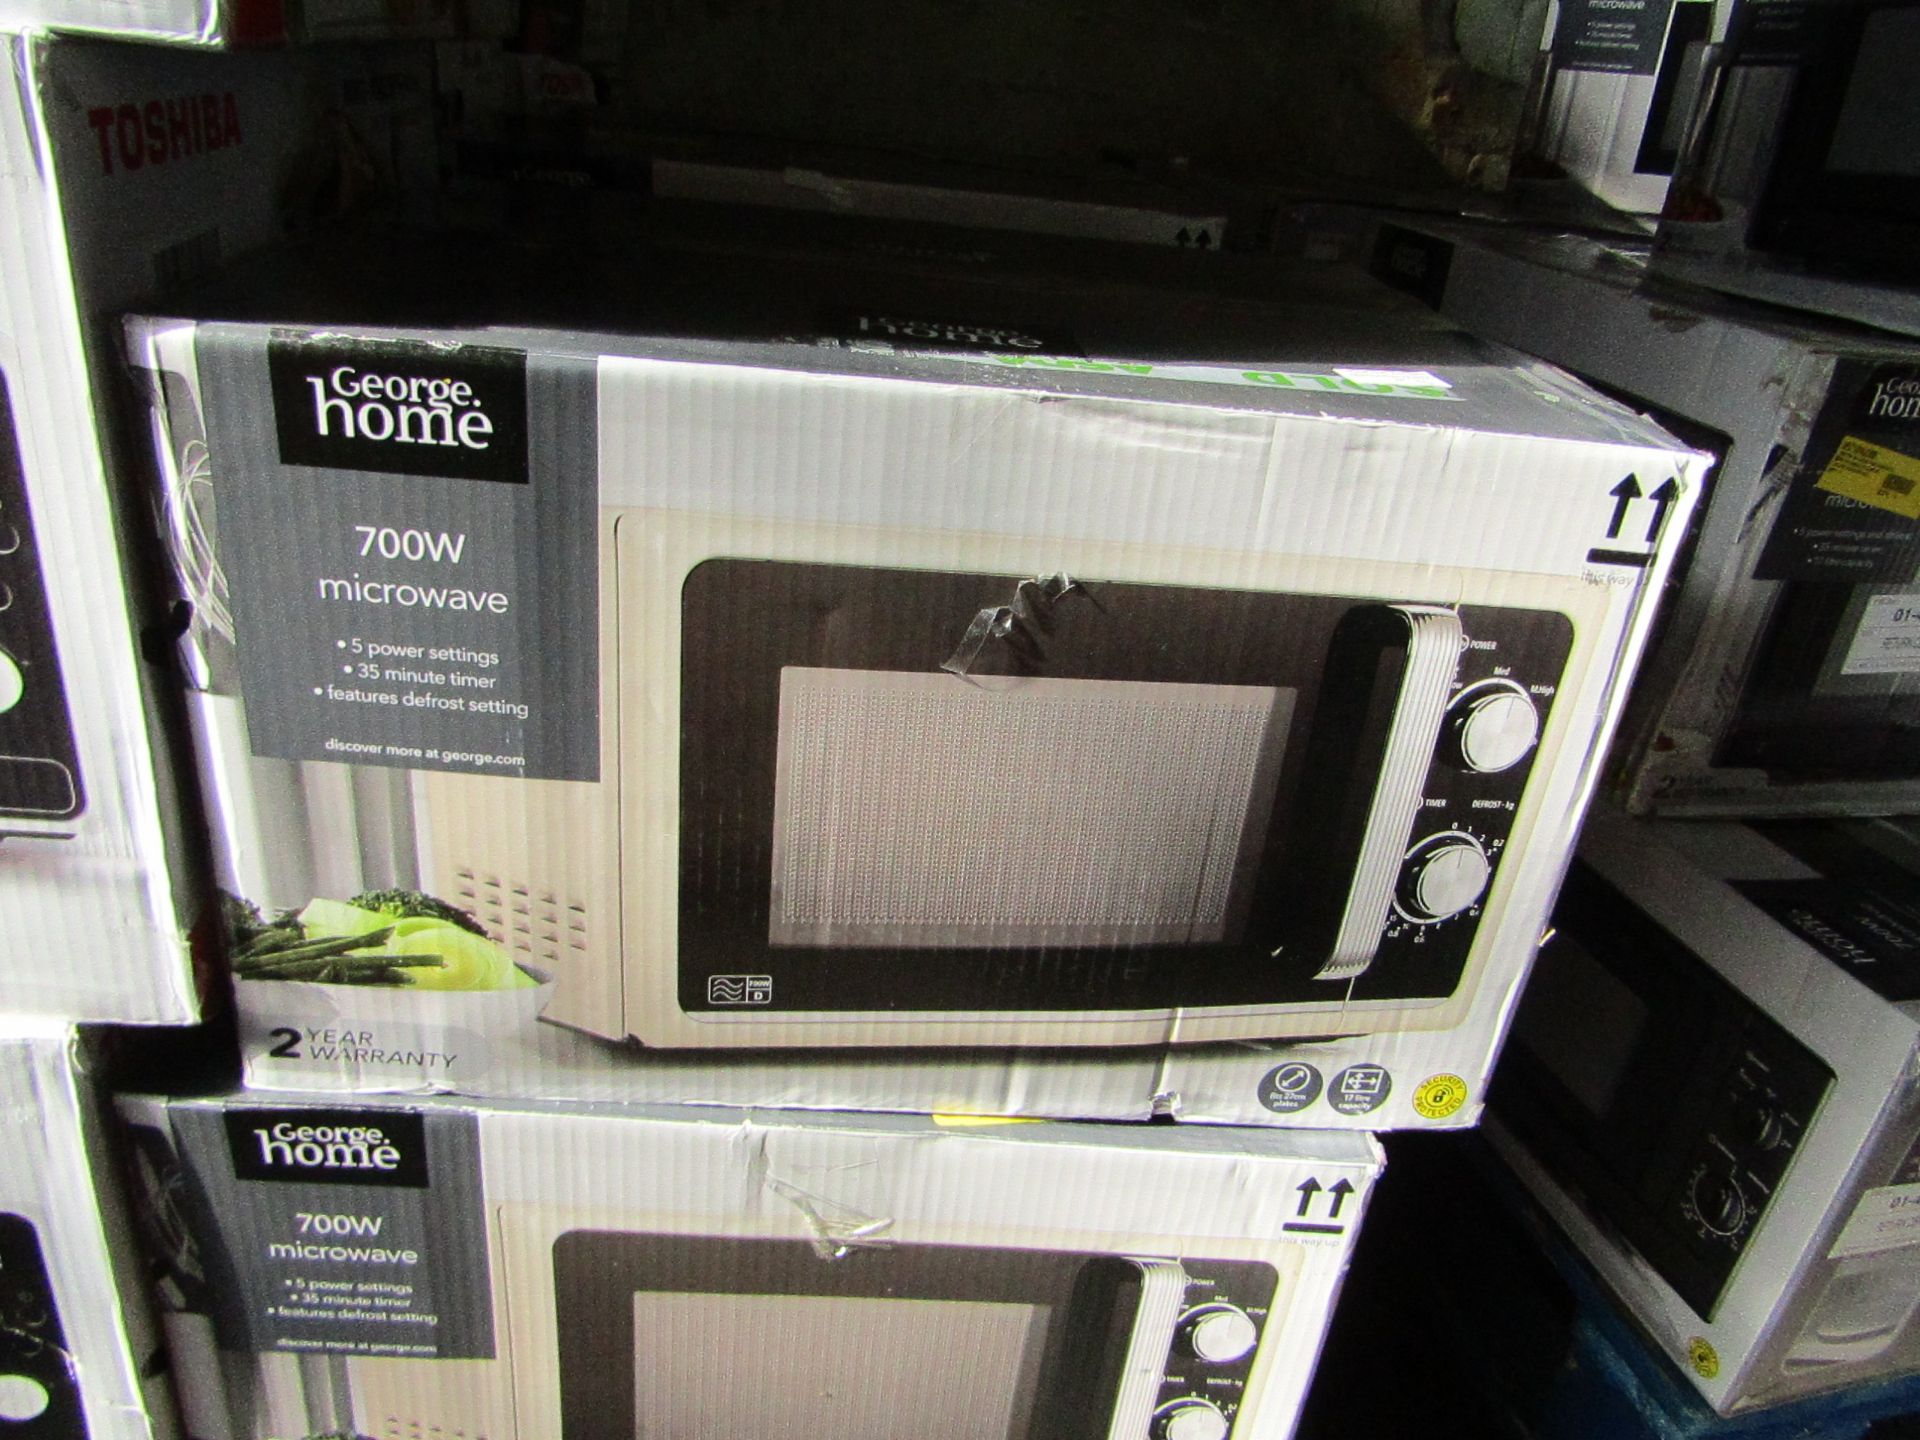 5x 700W Microwave Ovens - Cream - Unchecked & Boxed - RRP £50 - Total lot RRP £250 - Load Ref